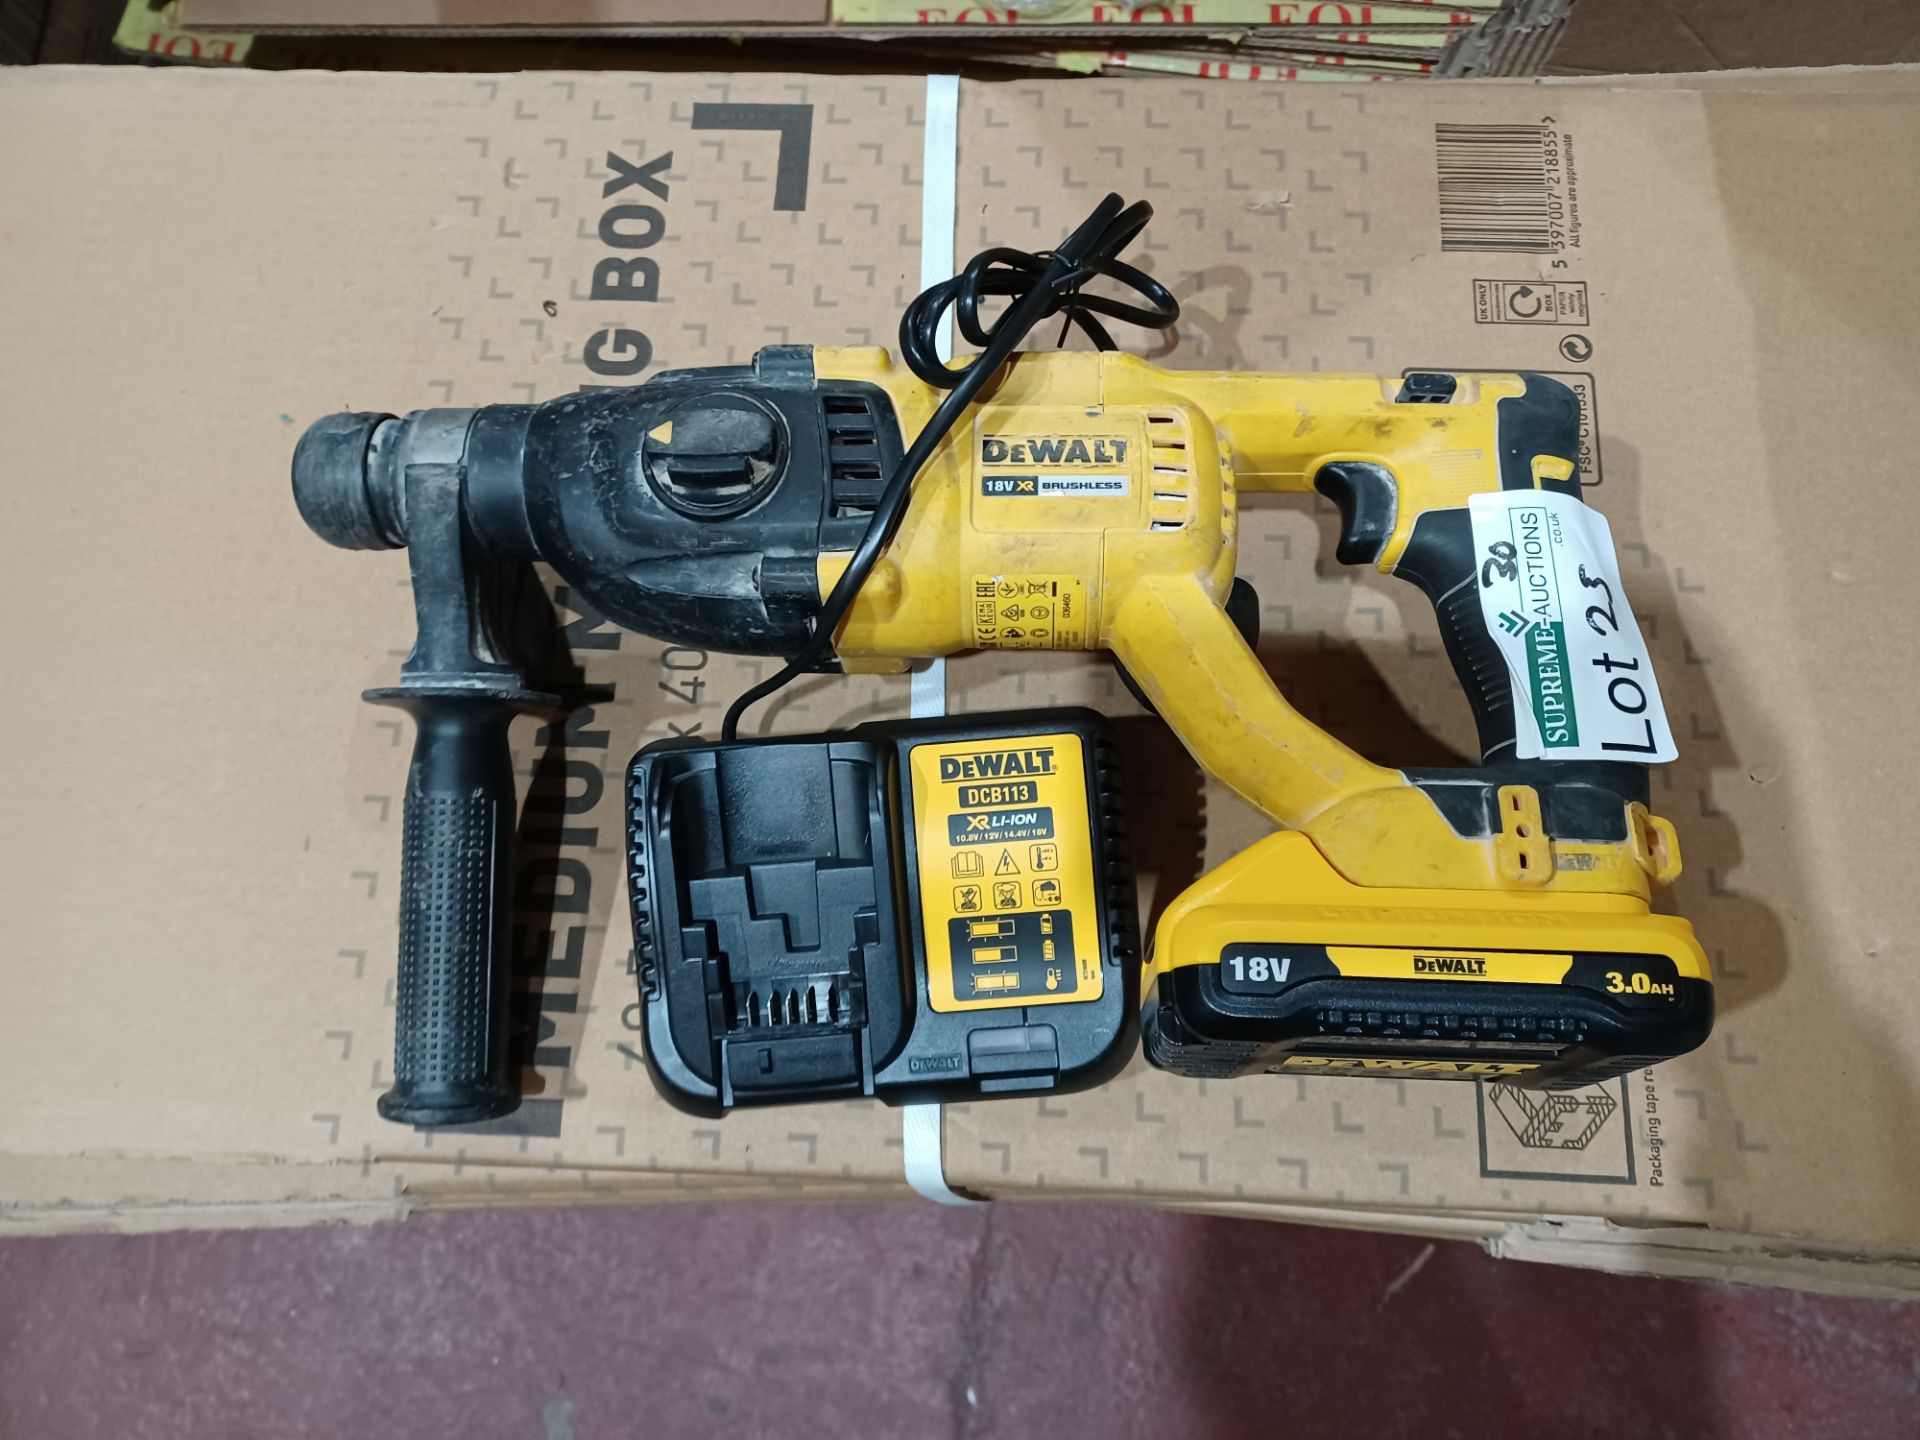 DEWALT DCH033 3KG 18V 4.0AH LI-ION XR BRUSHLESS CORDLESS SDS PLUS DRILL BARE WITH CHARGER AND